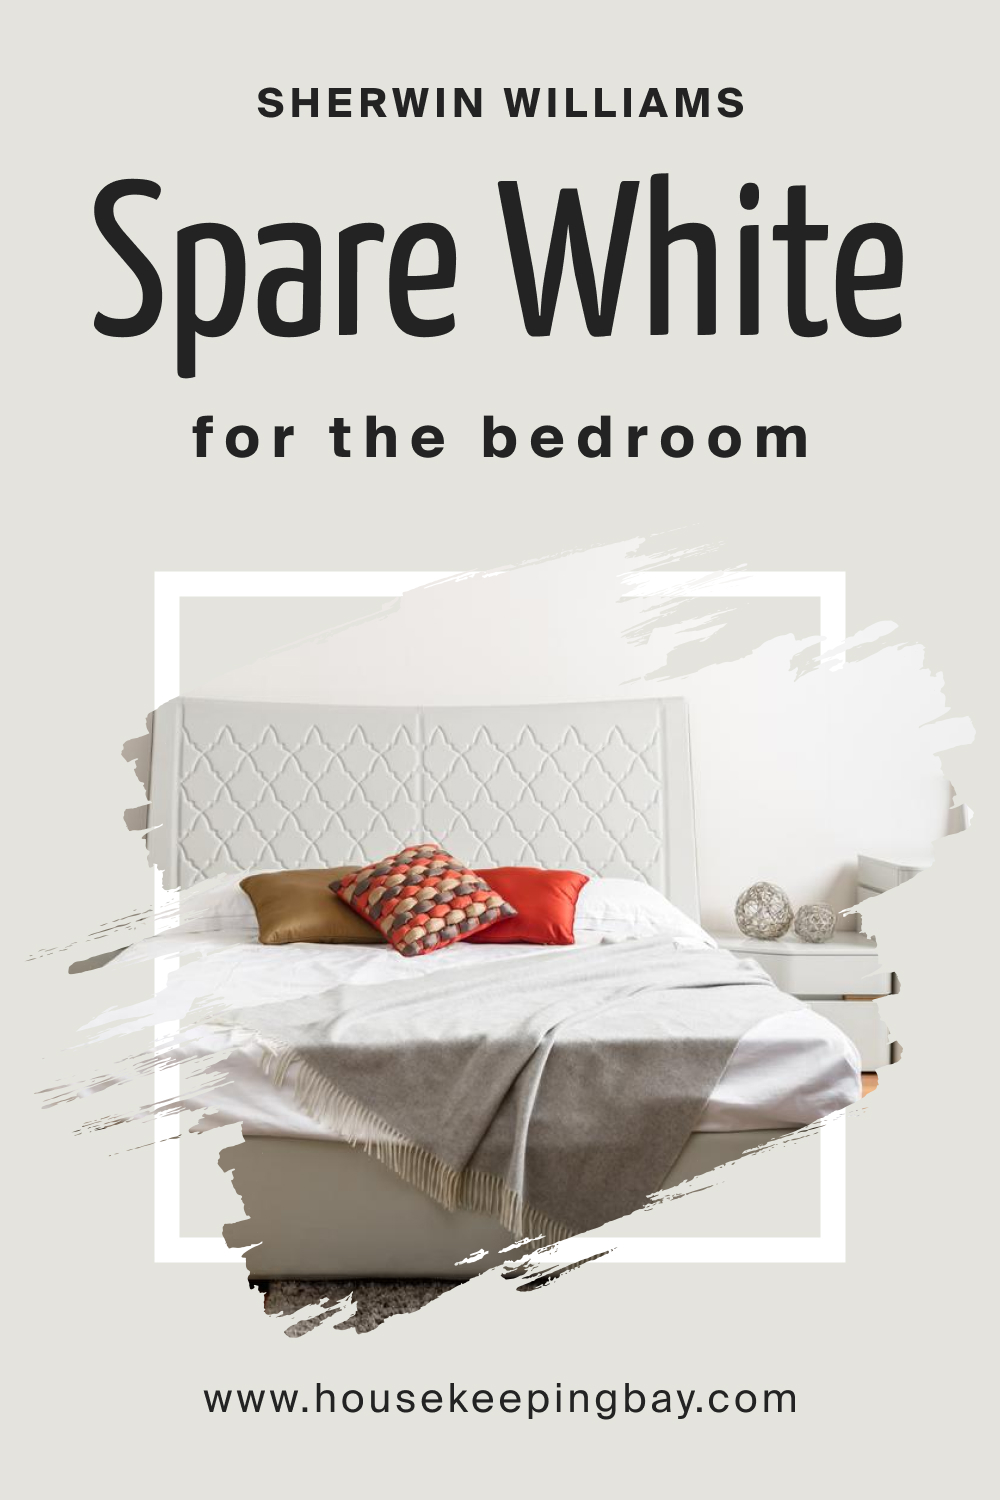 Sherwin Williams. SW Spare White For the bedroom